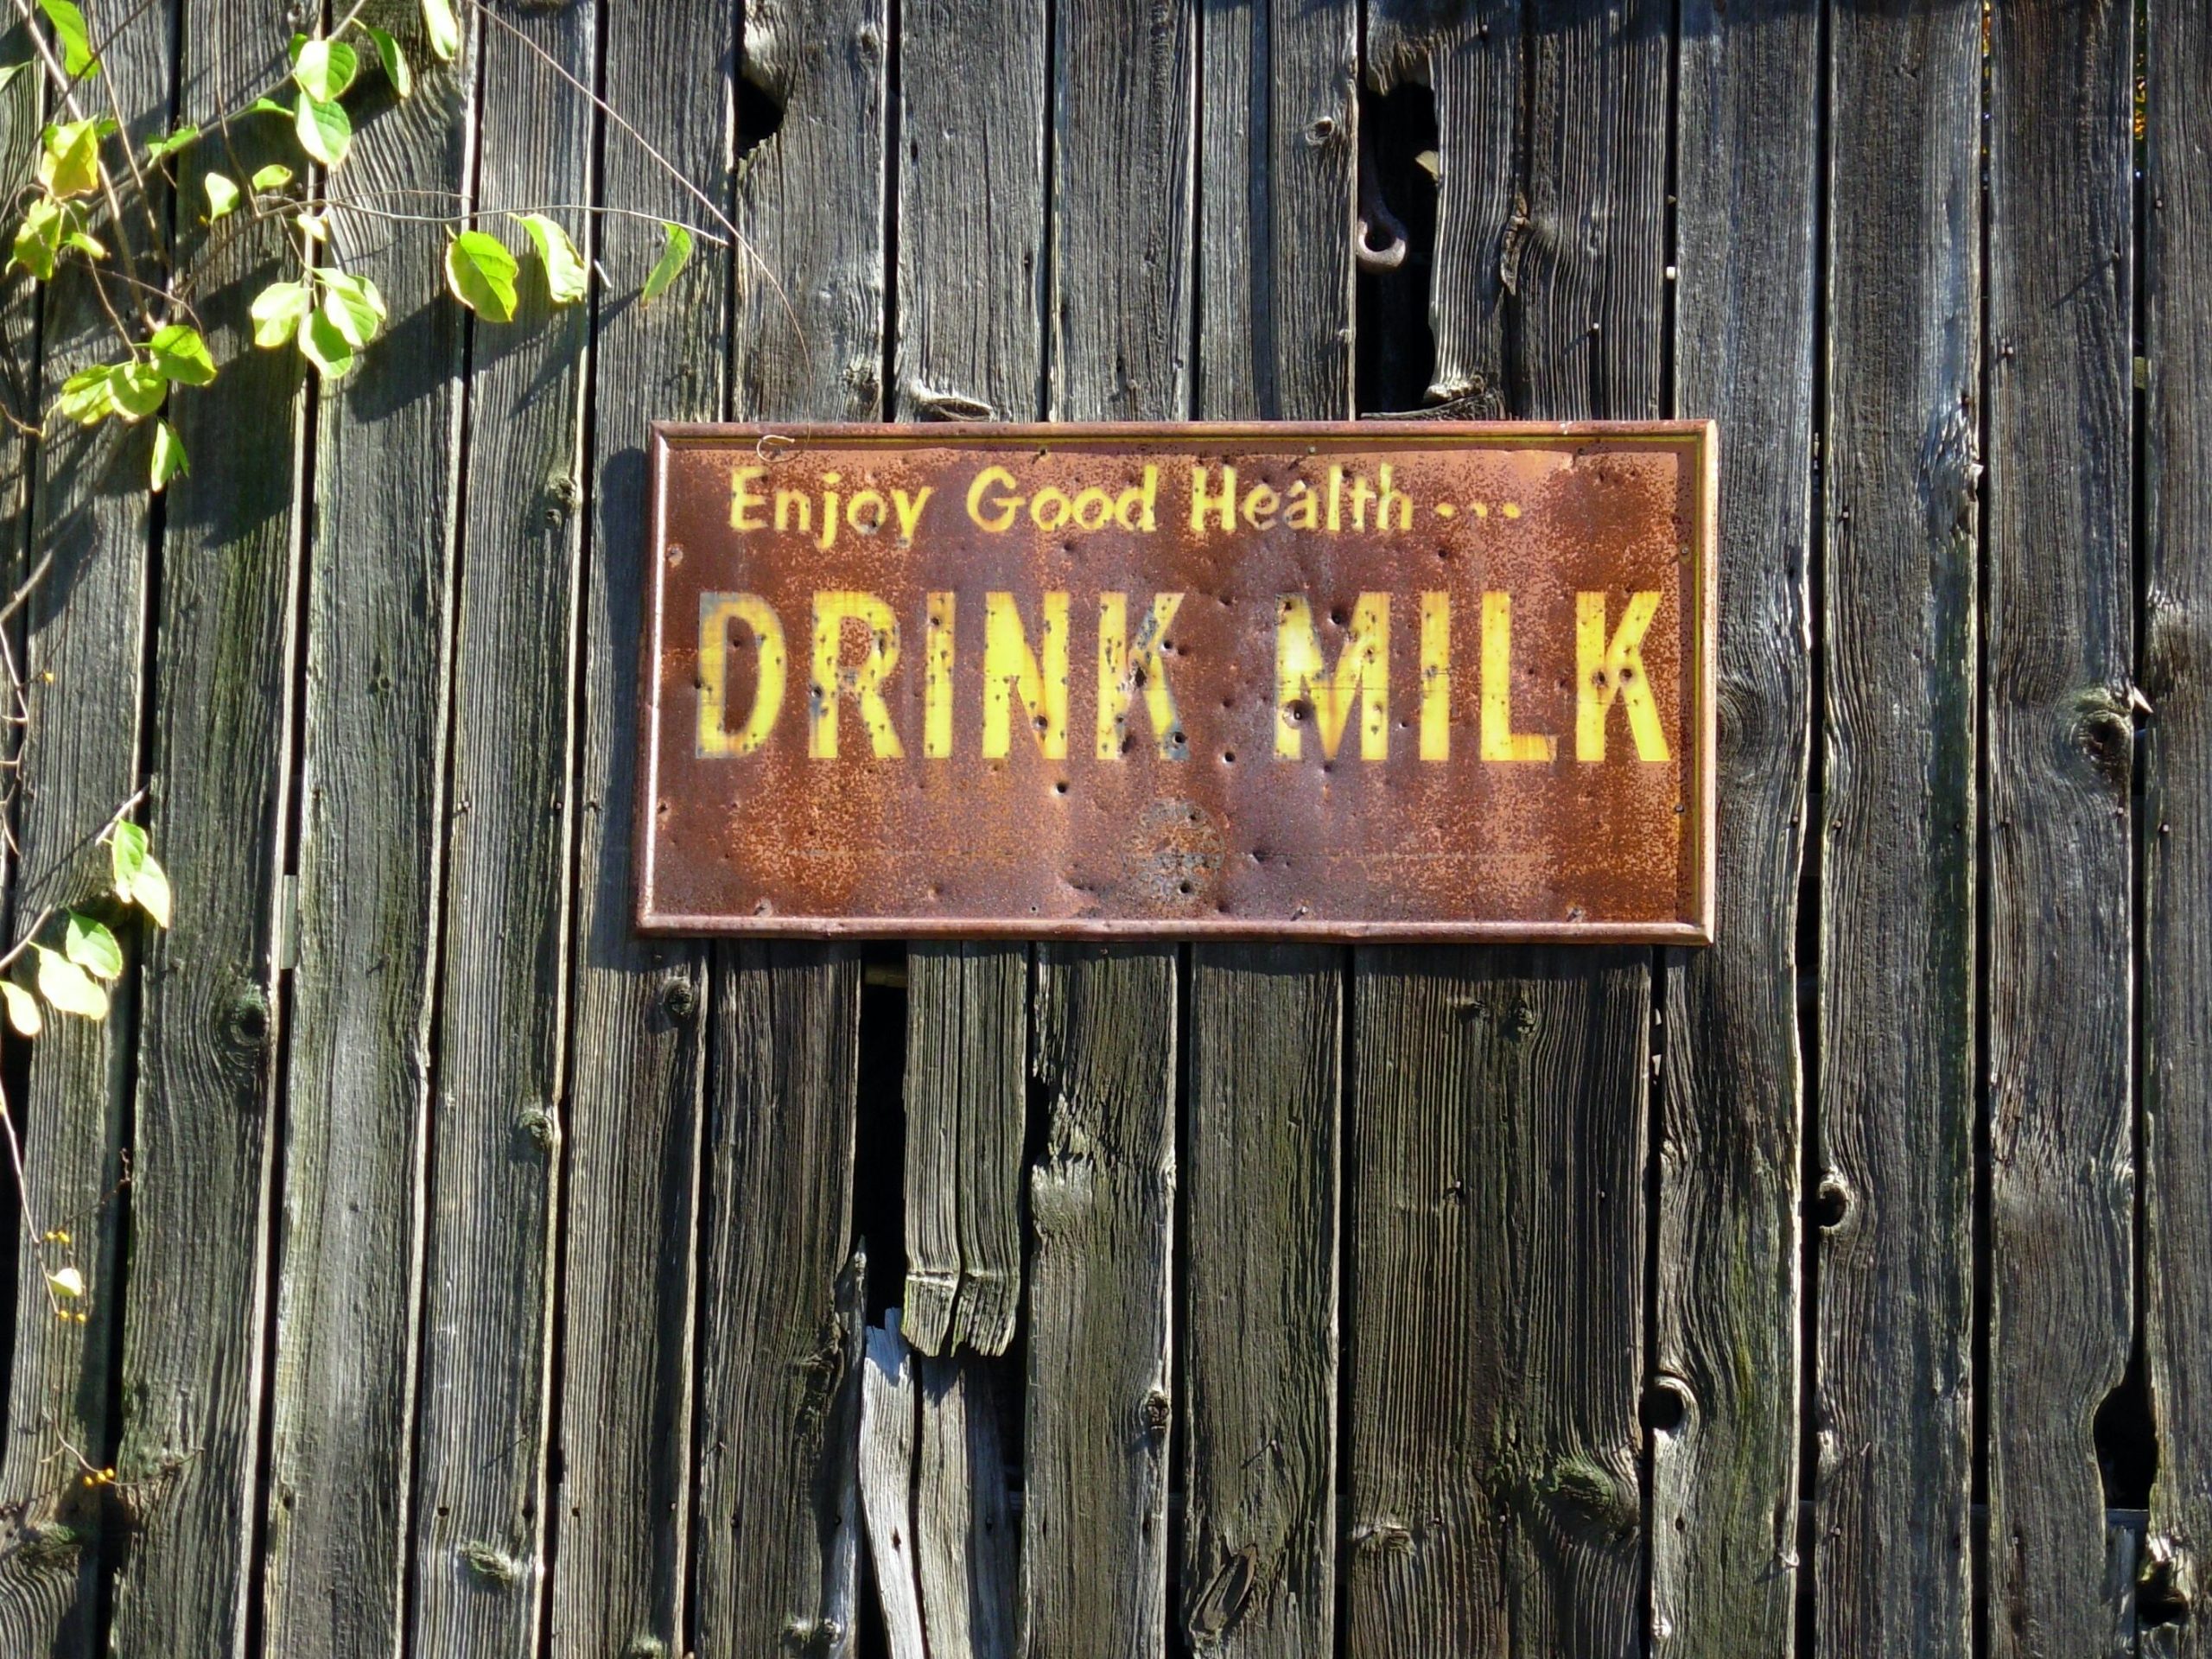 Drink Milk (user submitted)